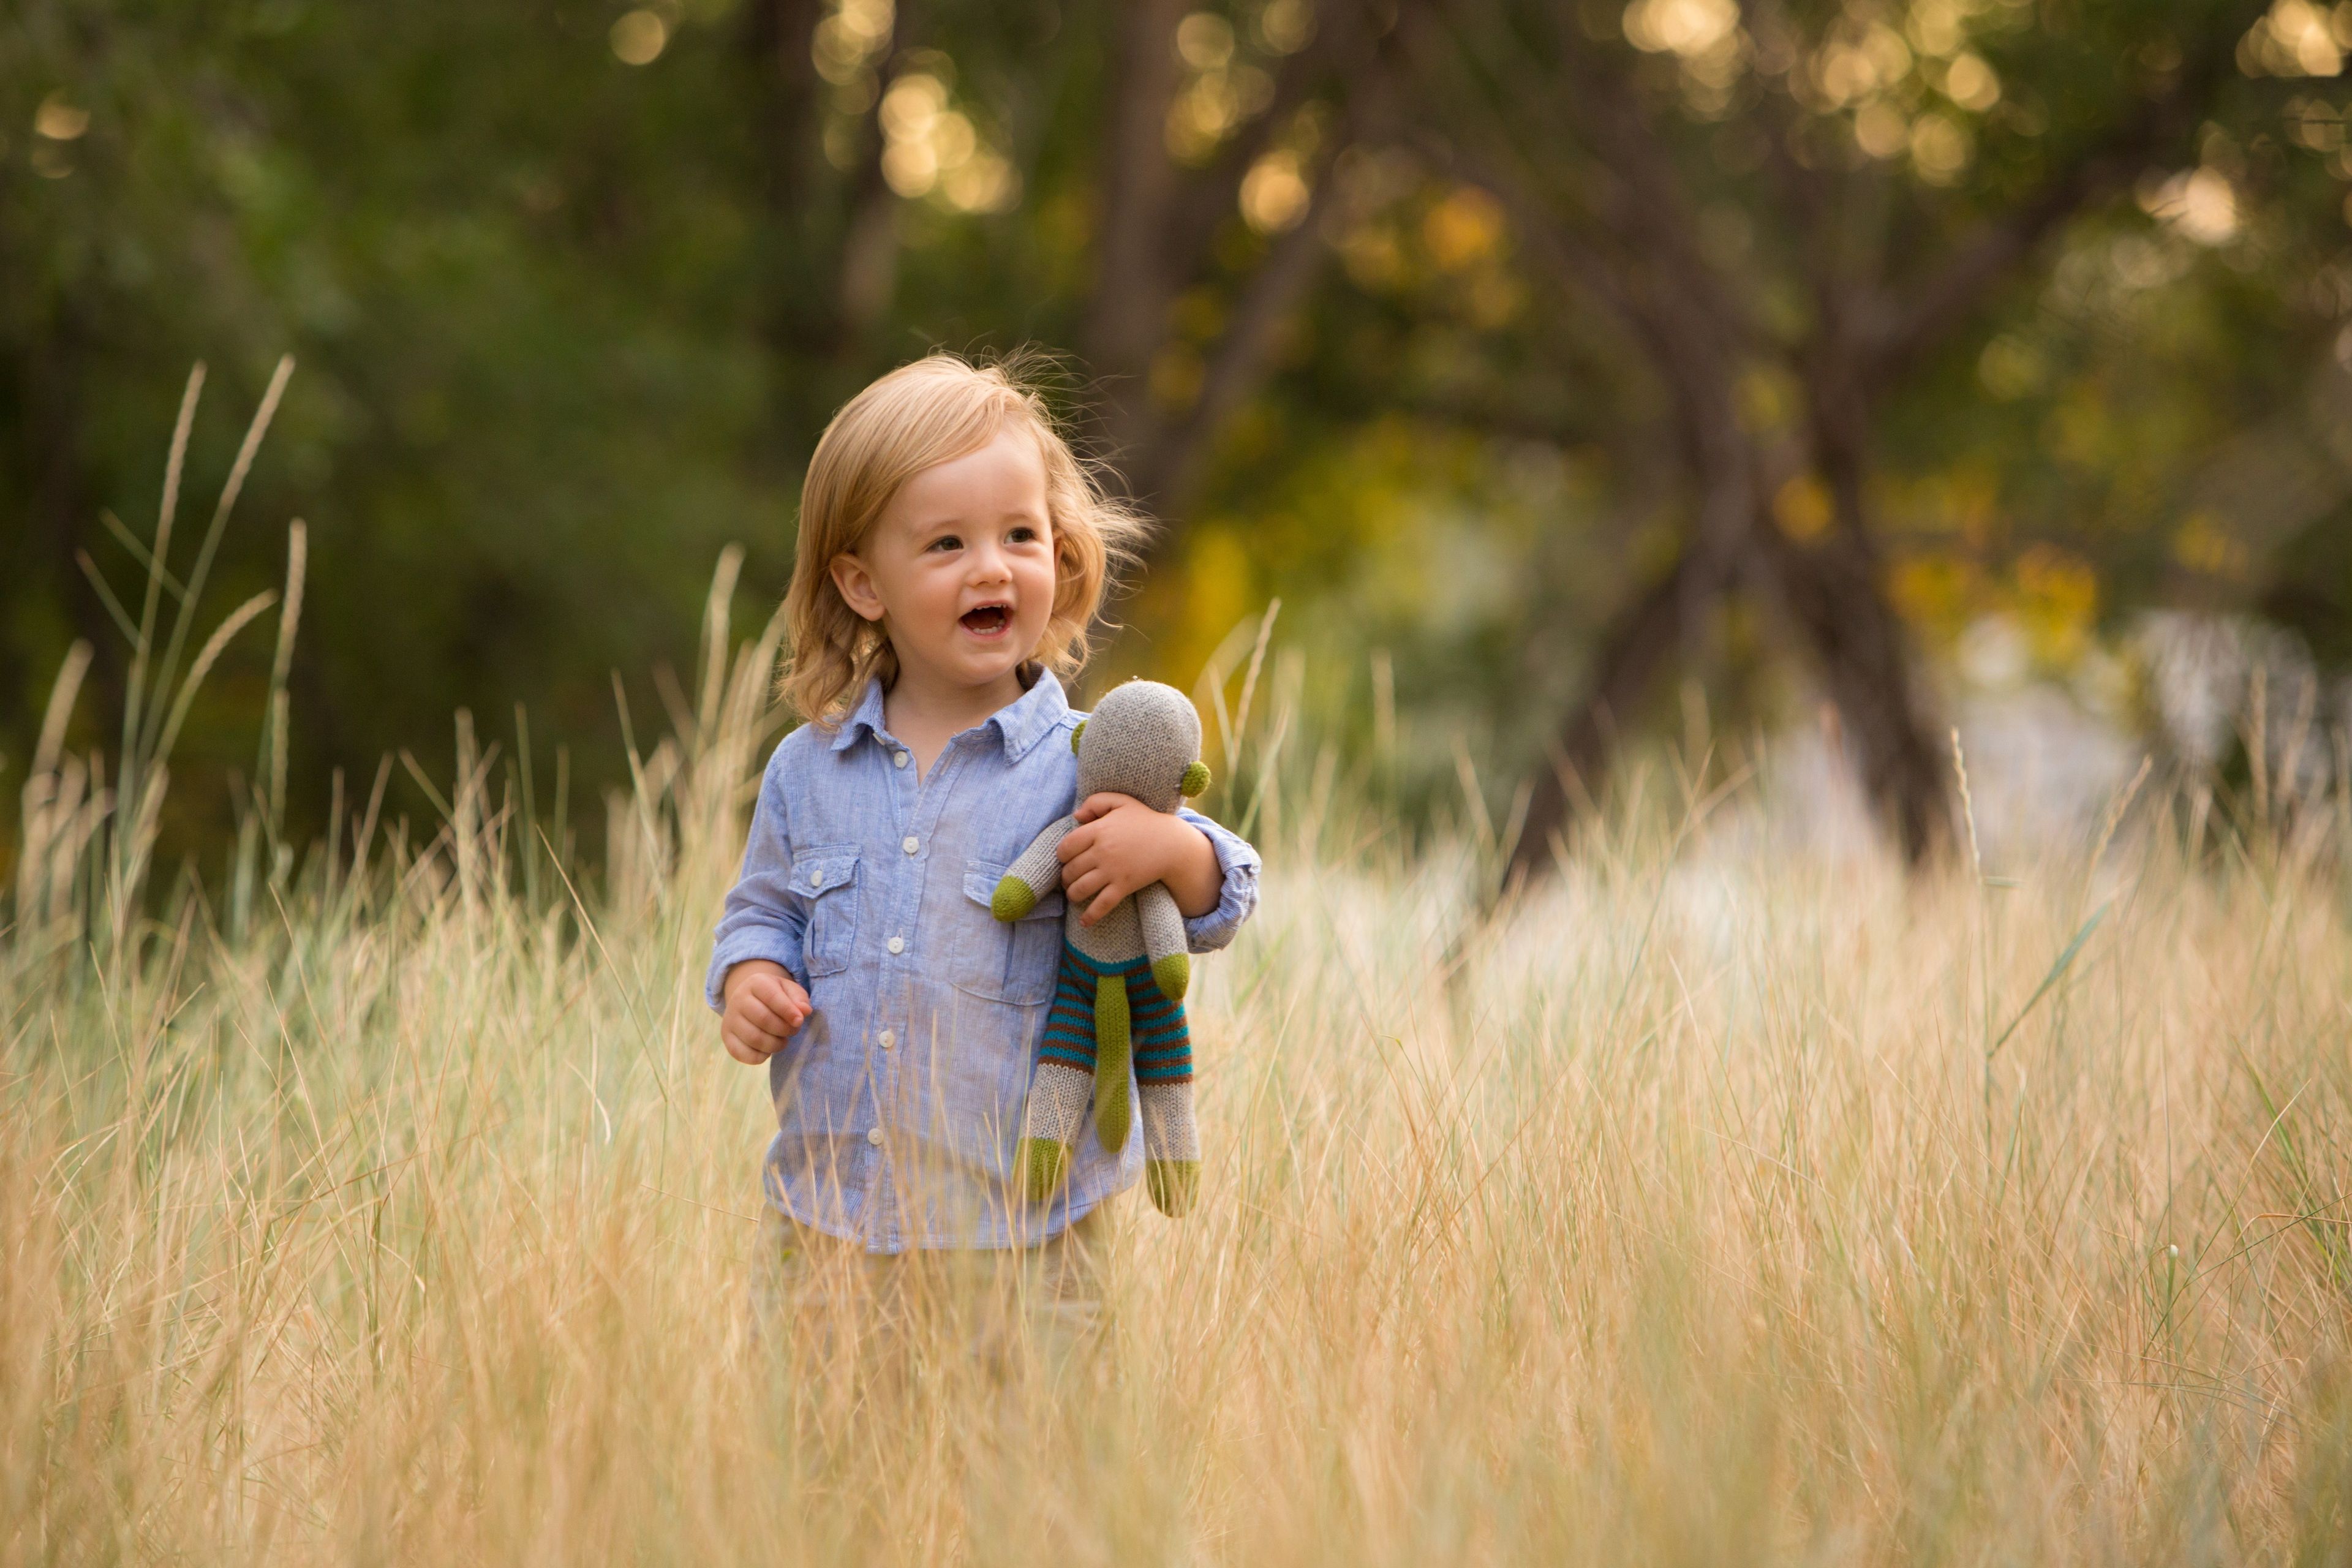 A toddler boy with a stuffed animal in a field.